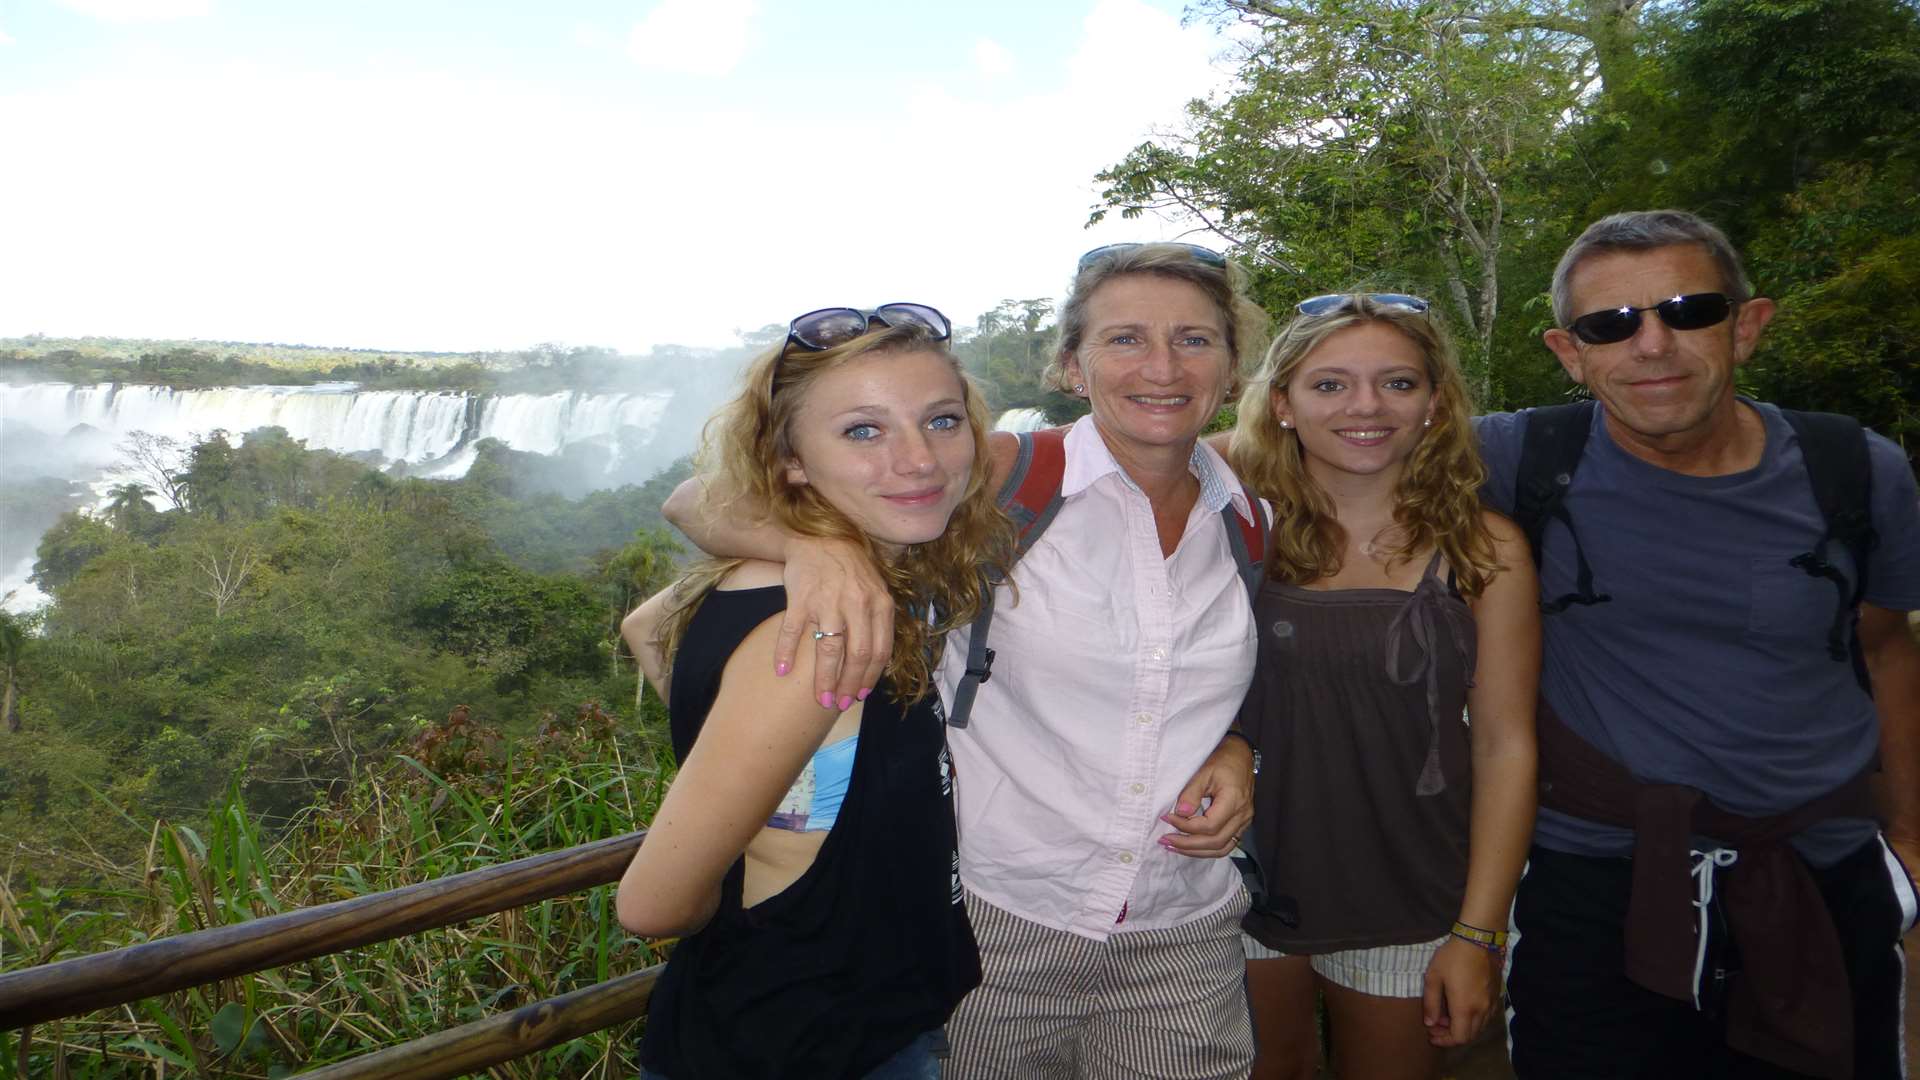 Gillian Metcalf, with daughters Natasha, Alice and husband Charlie by the Iguazu falls on their holiday in Brazil